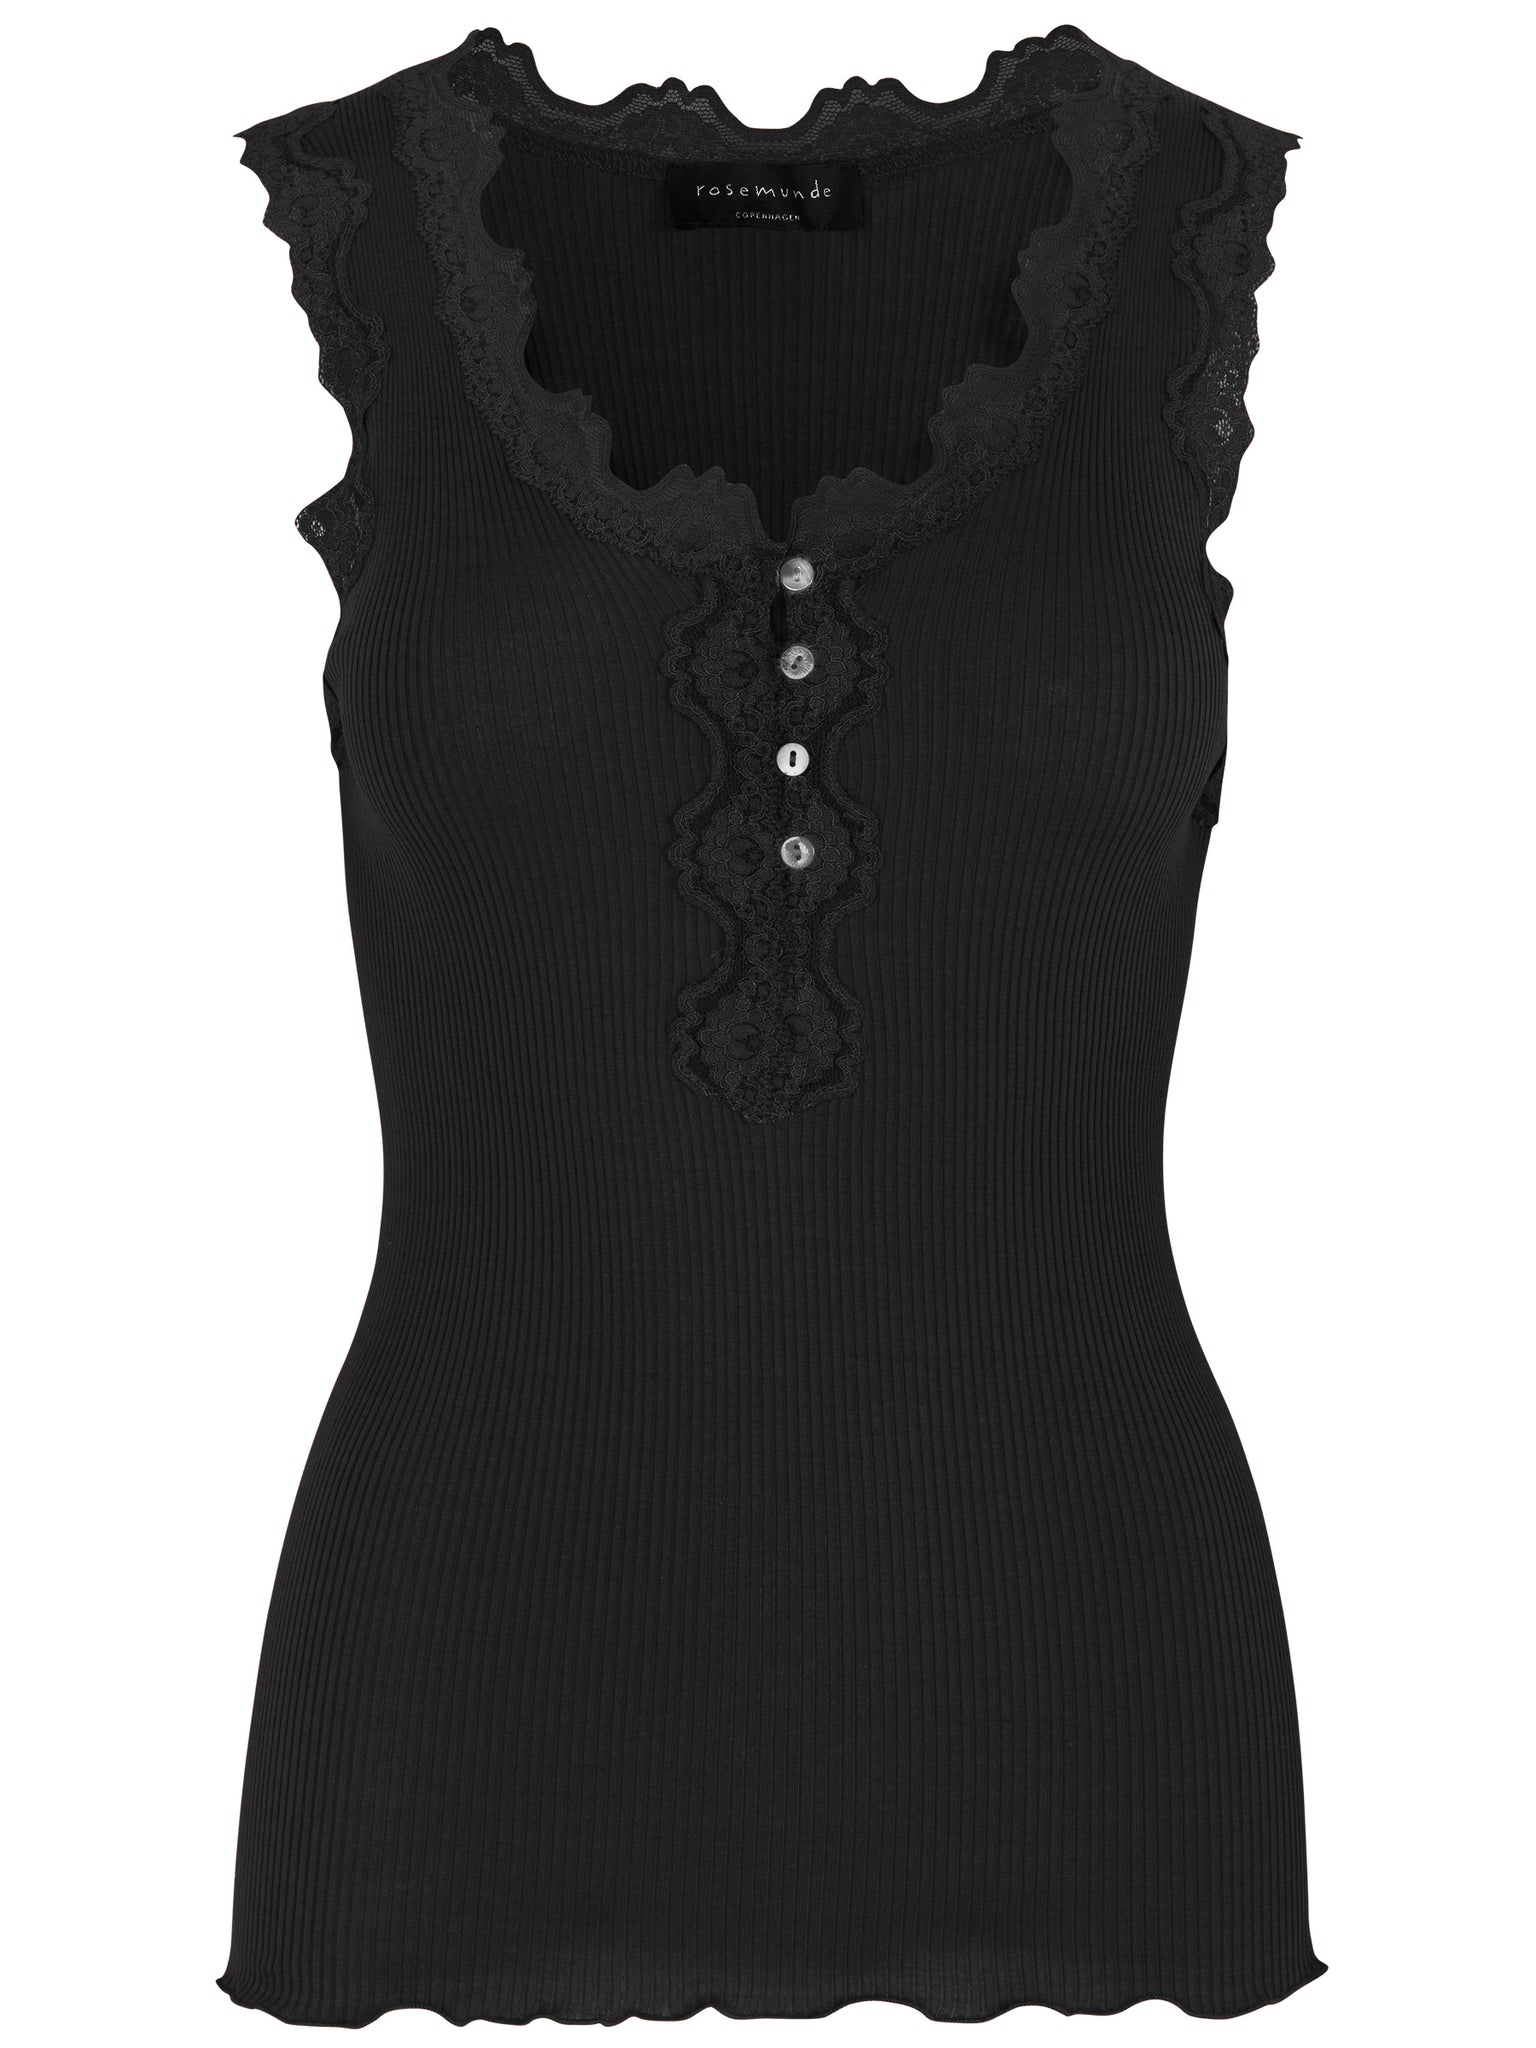 Silk top with button & lace